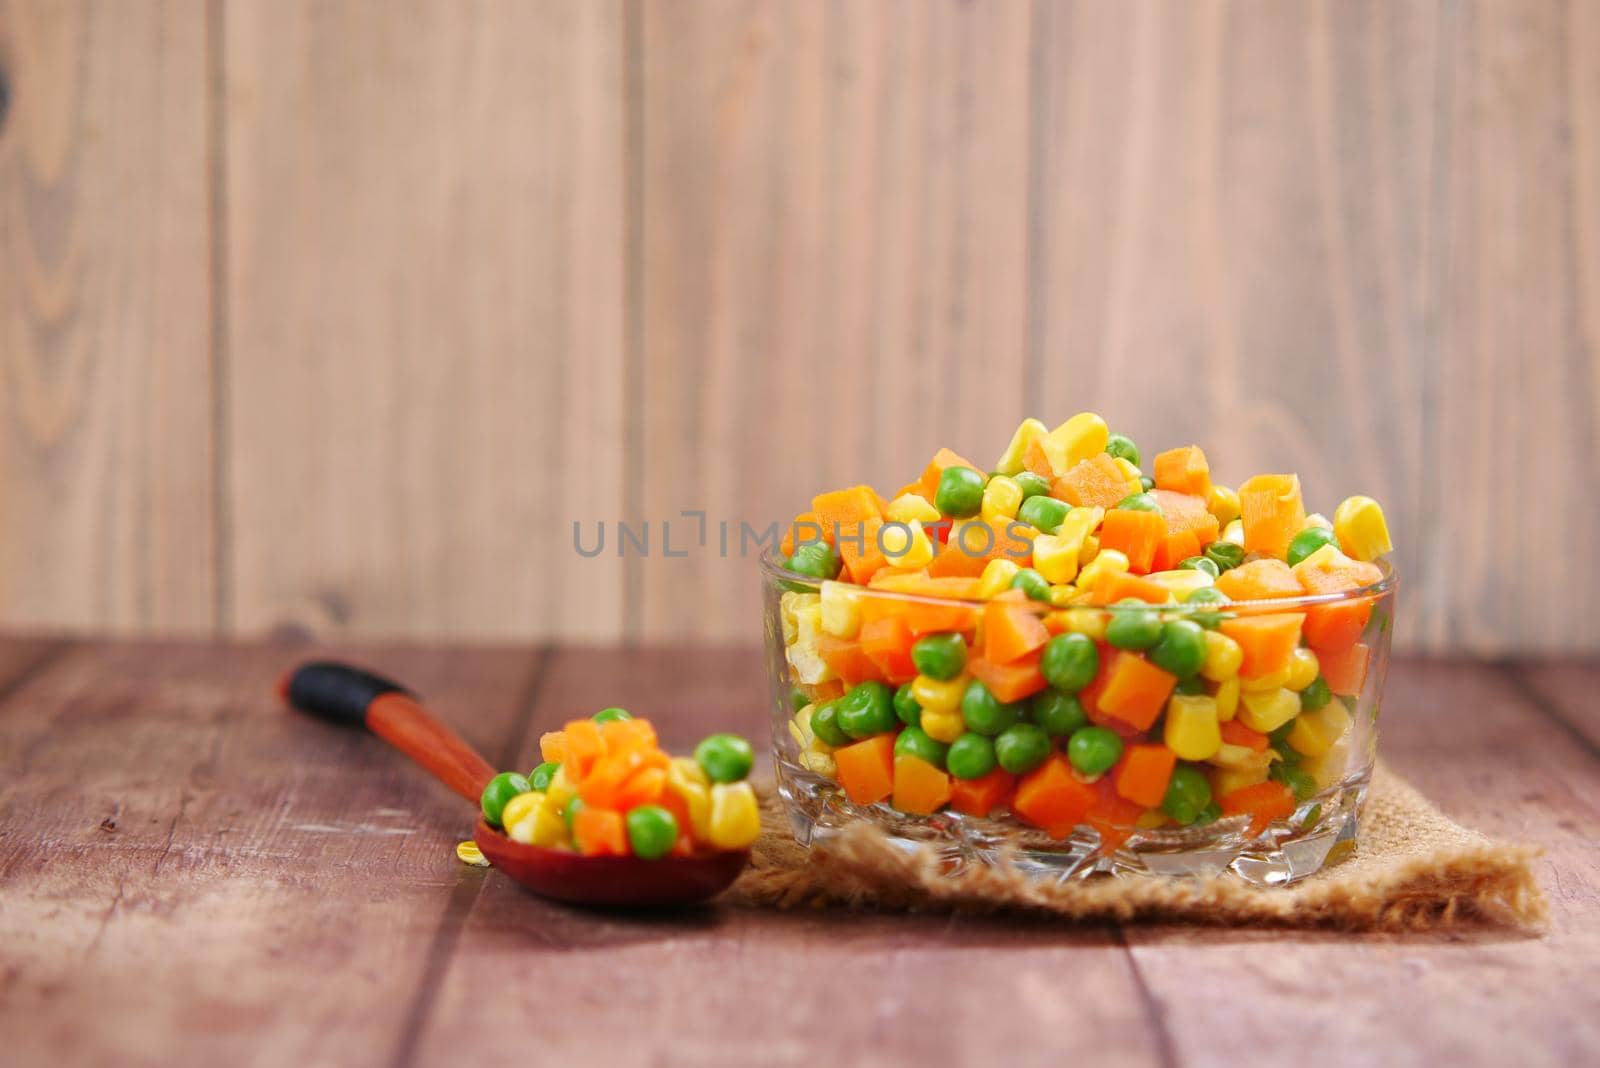 corn, carrot and beans in a bowl on table with copy space by towfiq007